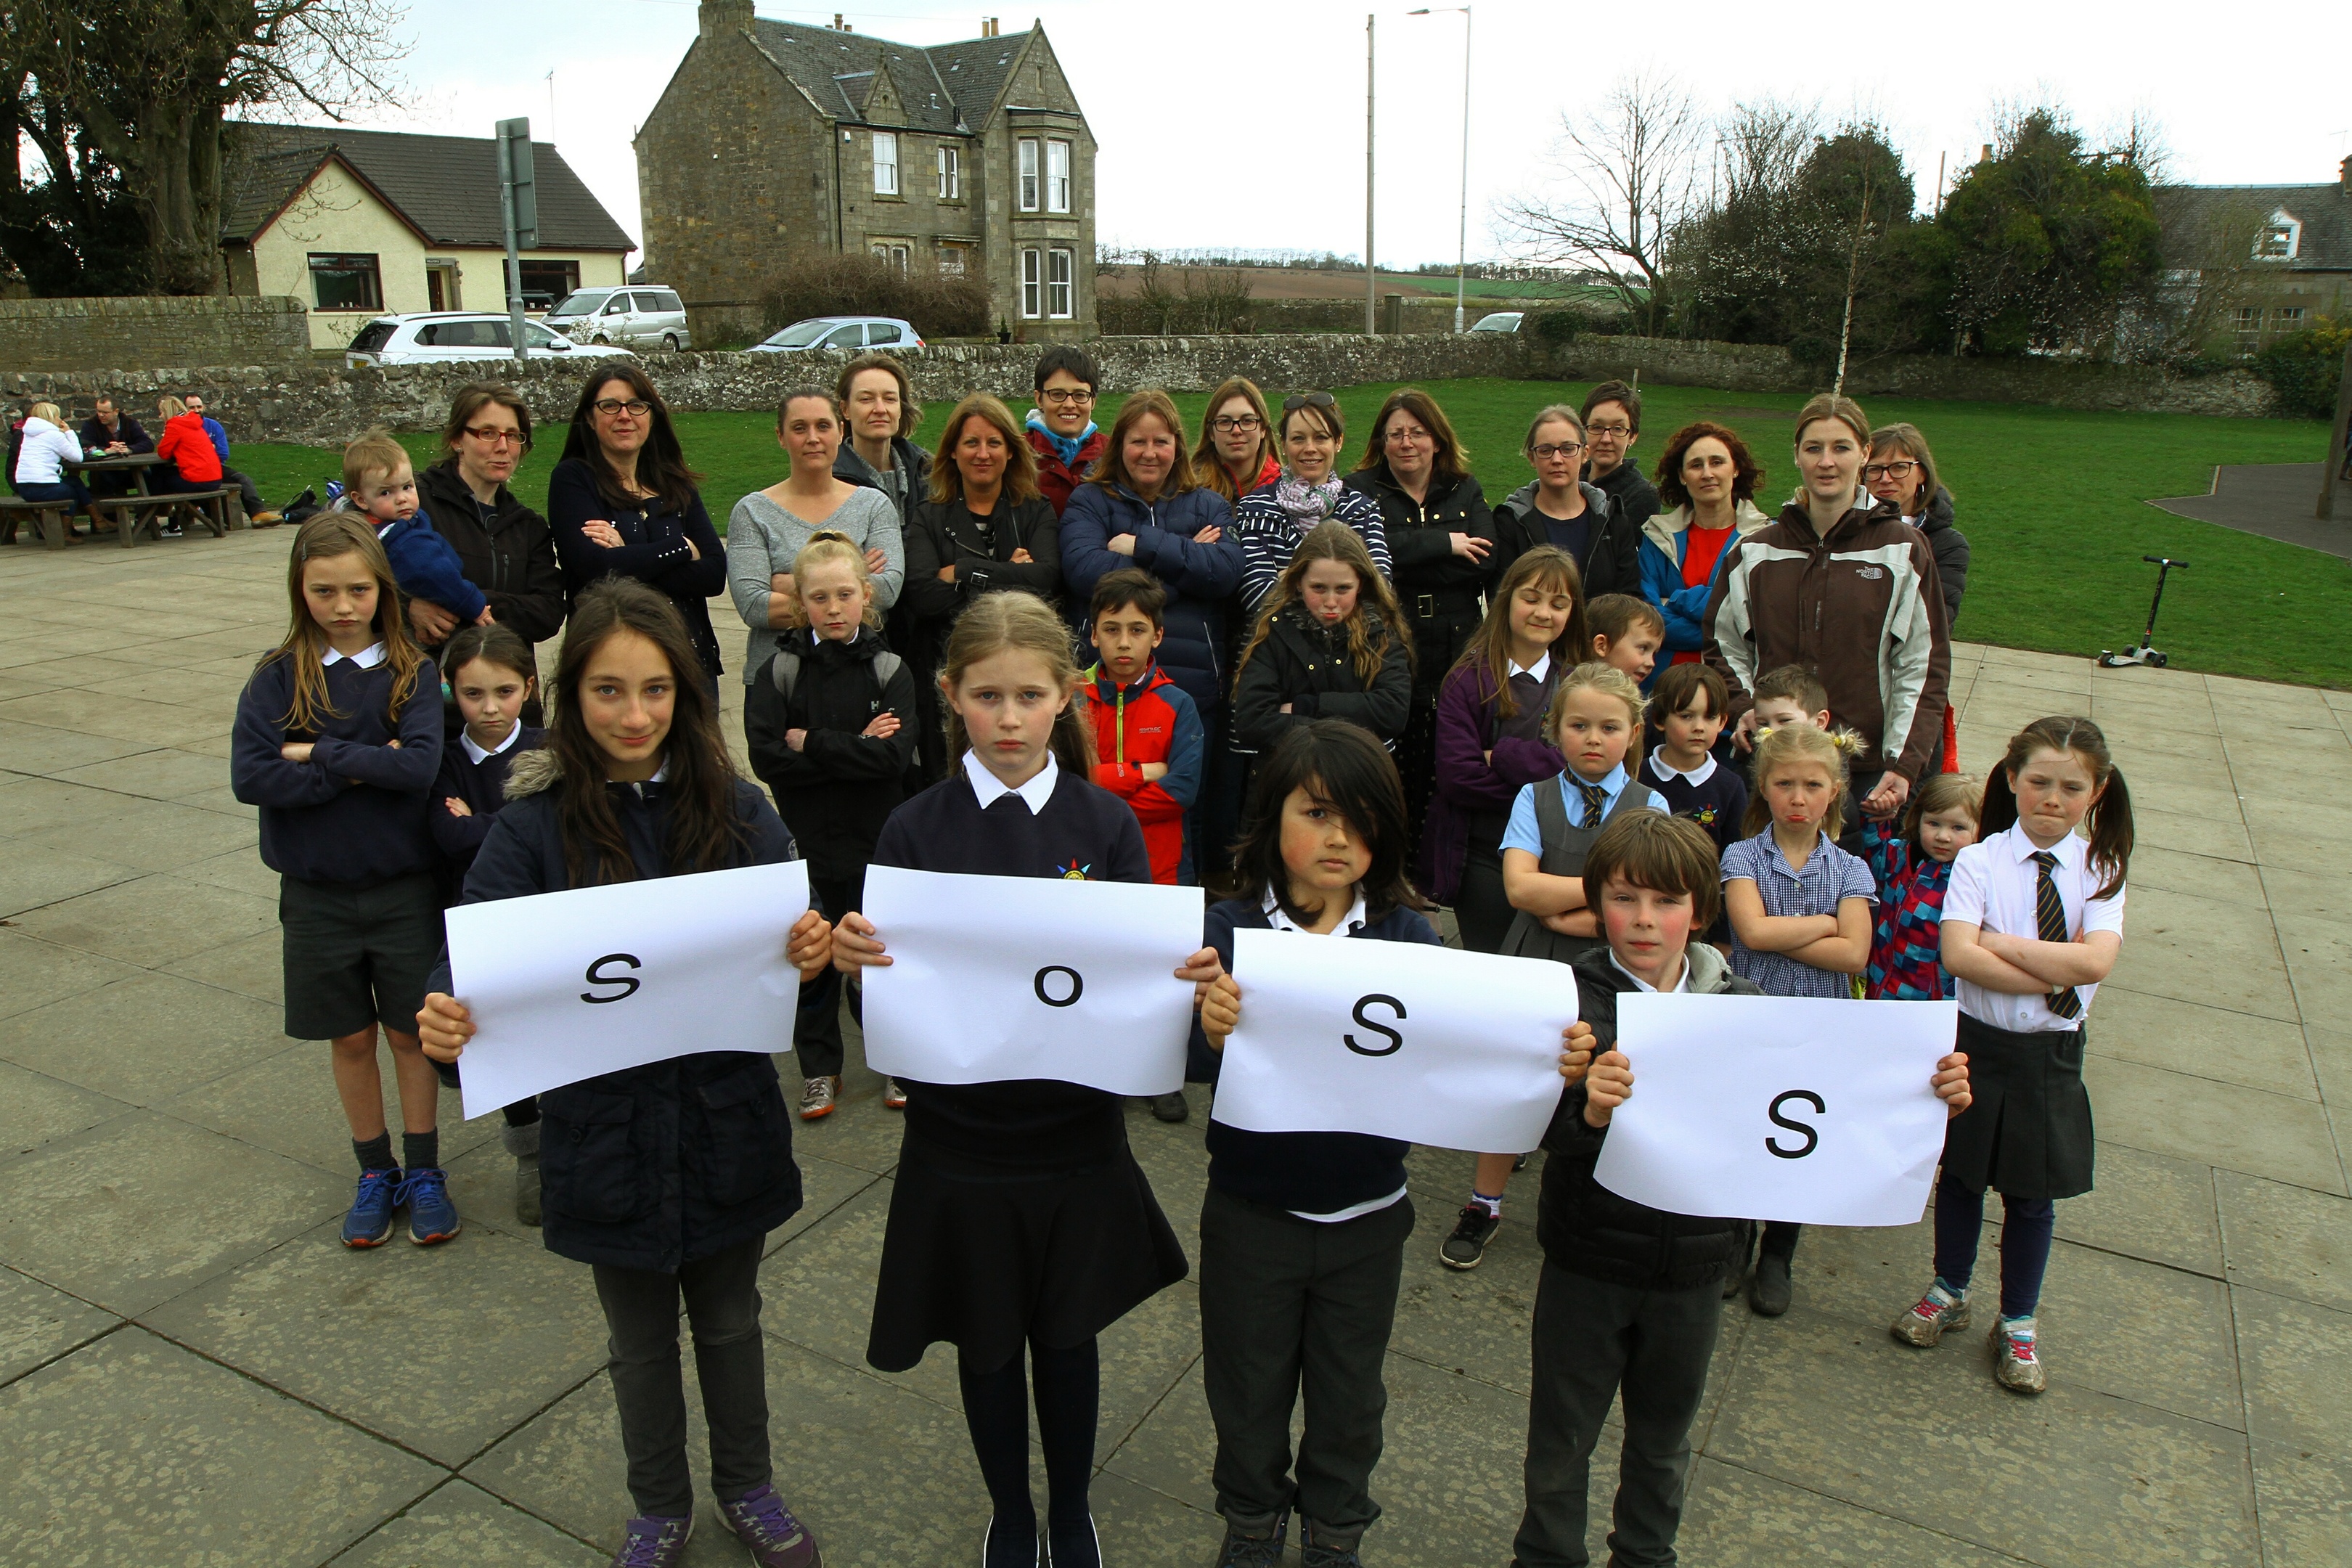 Ceres Primary pupils Marnie Raval, Maddie Burns, Kazuo O'Connor and Moritz Gerken - Dempster holding up SOSS (Save Our School Secretaries) with some of the pupils and parents at Ceres Primary School